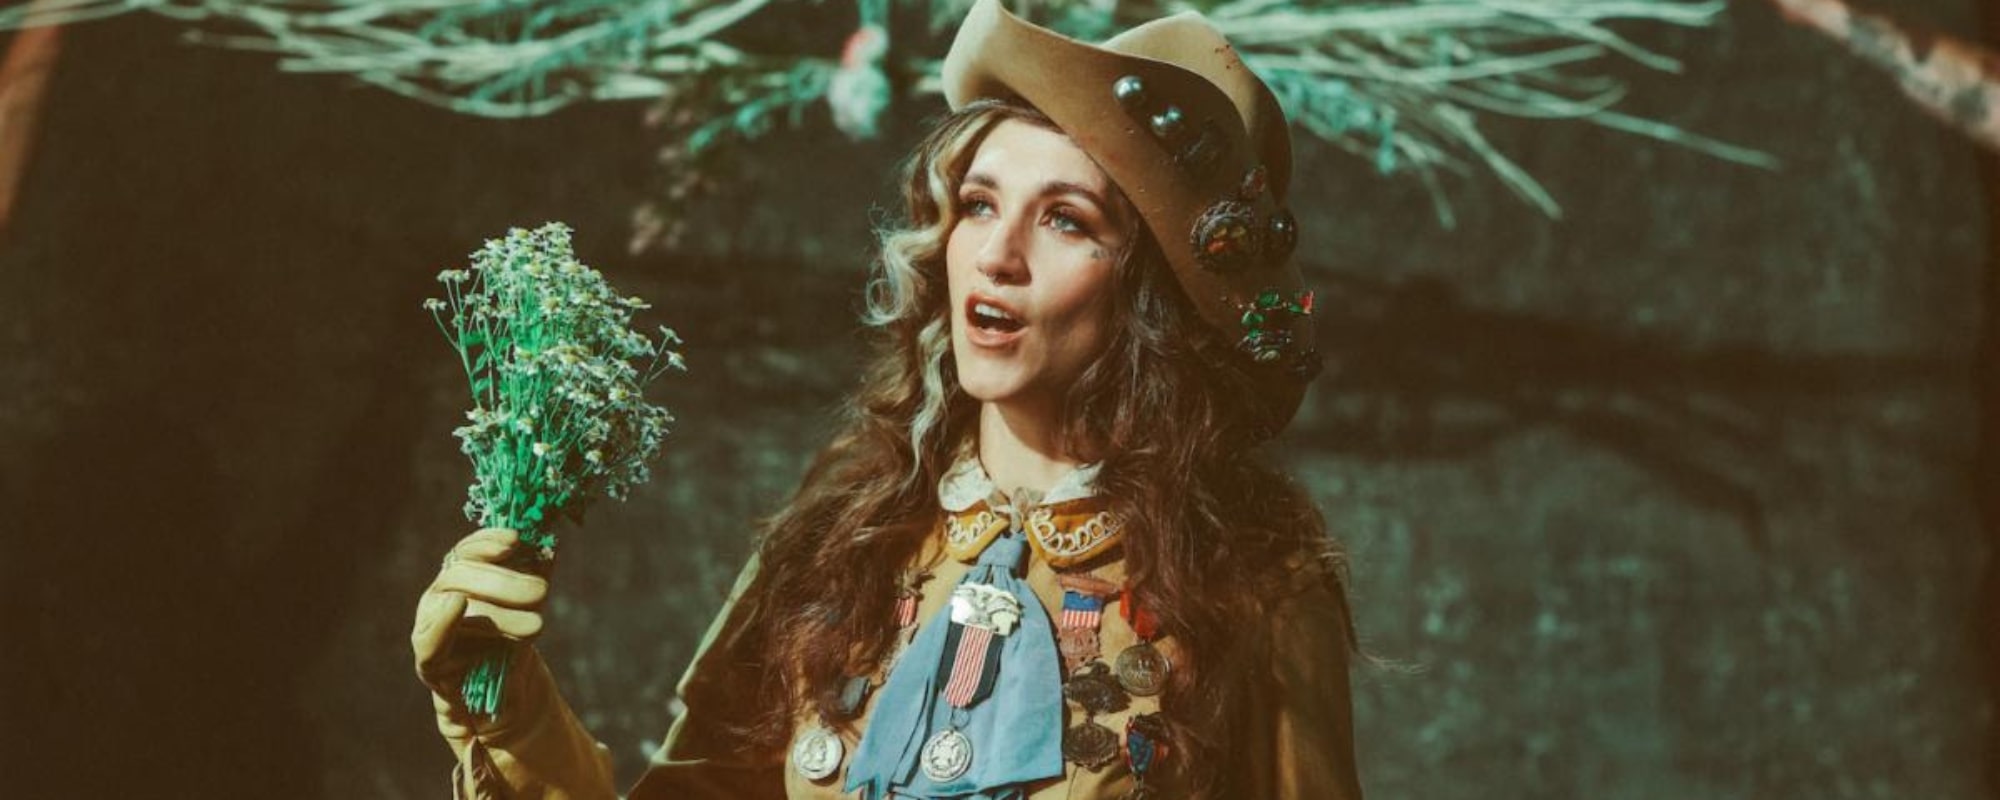 Sierra Ferrell Gives Fans a Final Taste of Her Upcoming Album ‘Trail of Flowers’ with “American Dreaming”